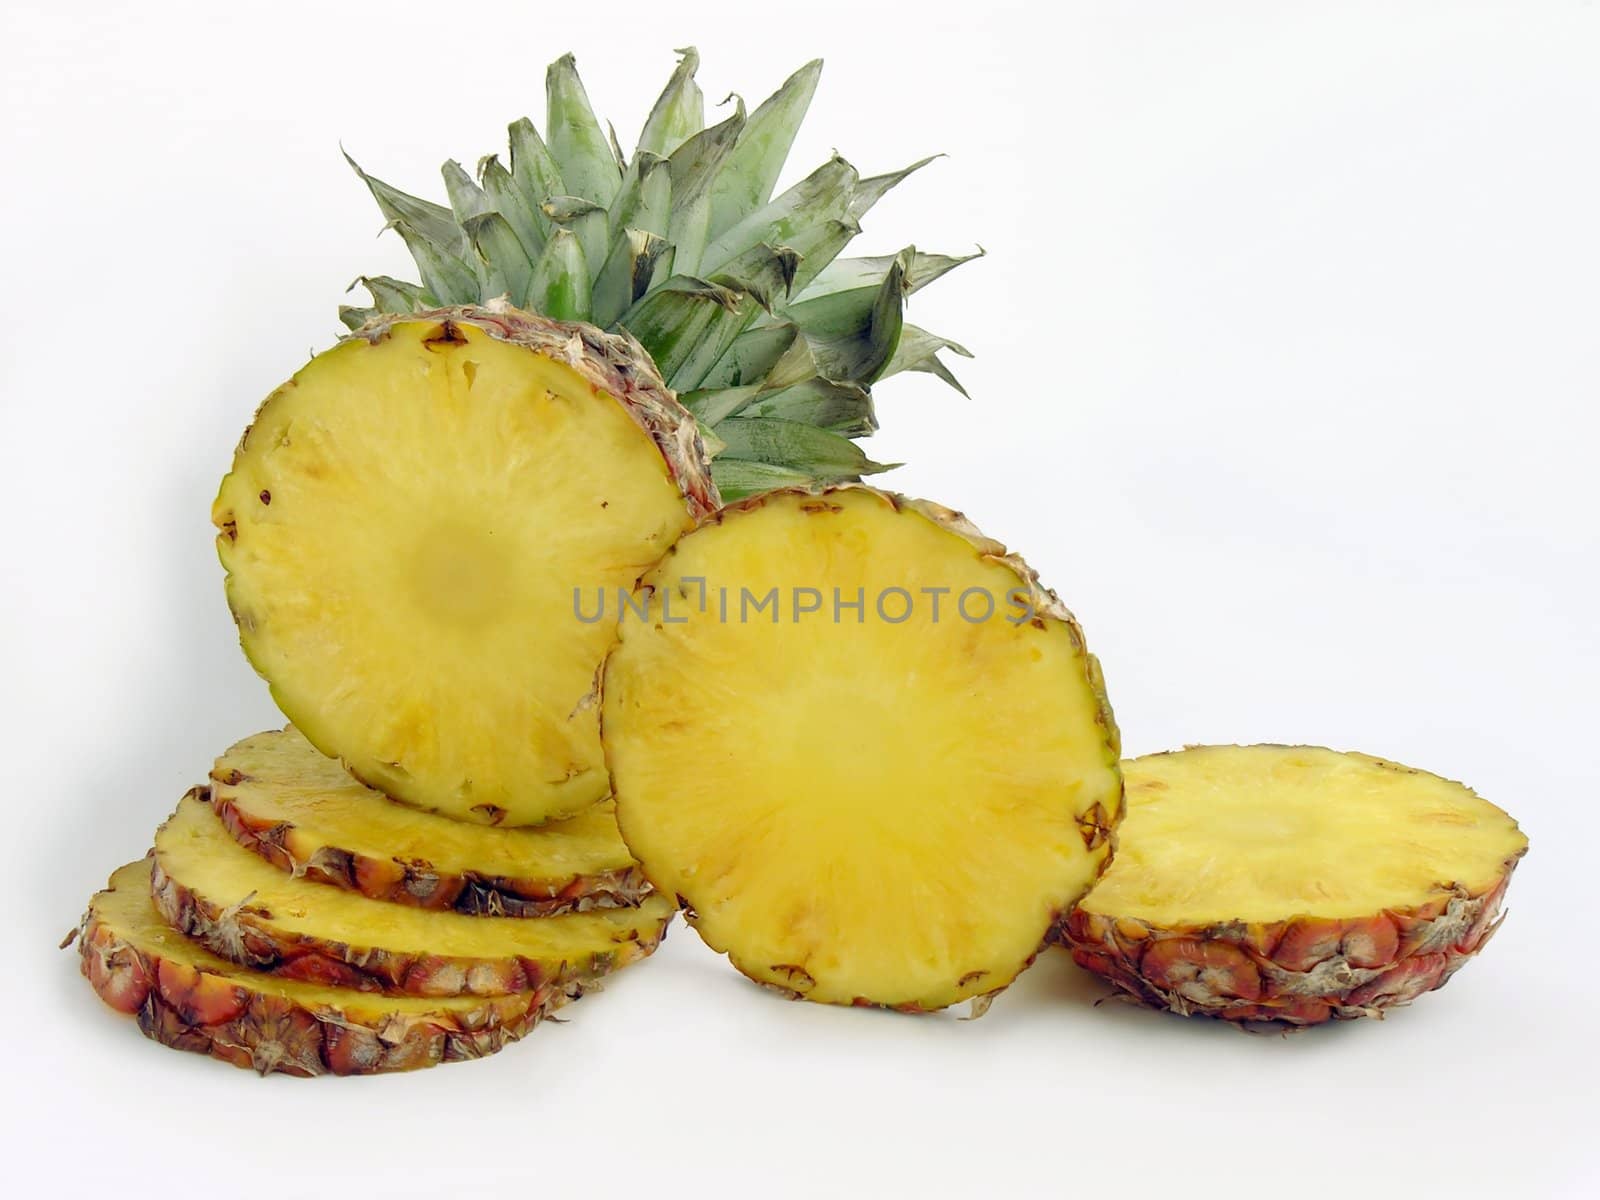 pineapple are simoly wonderful fruits becdause of tast and aroma